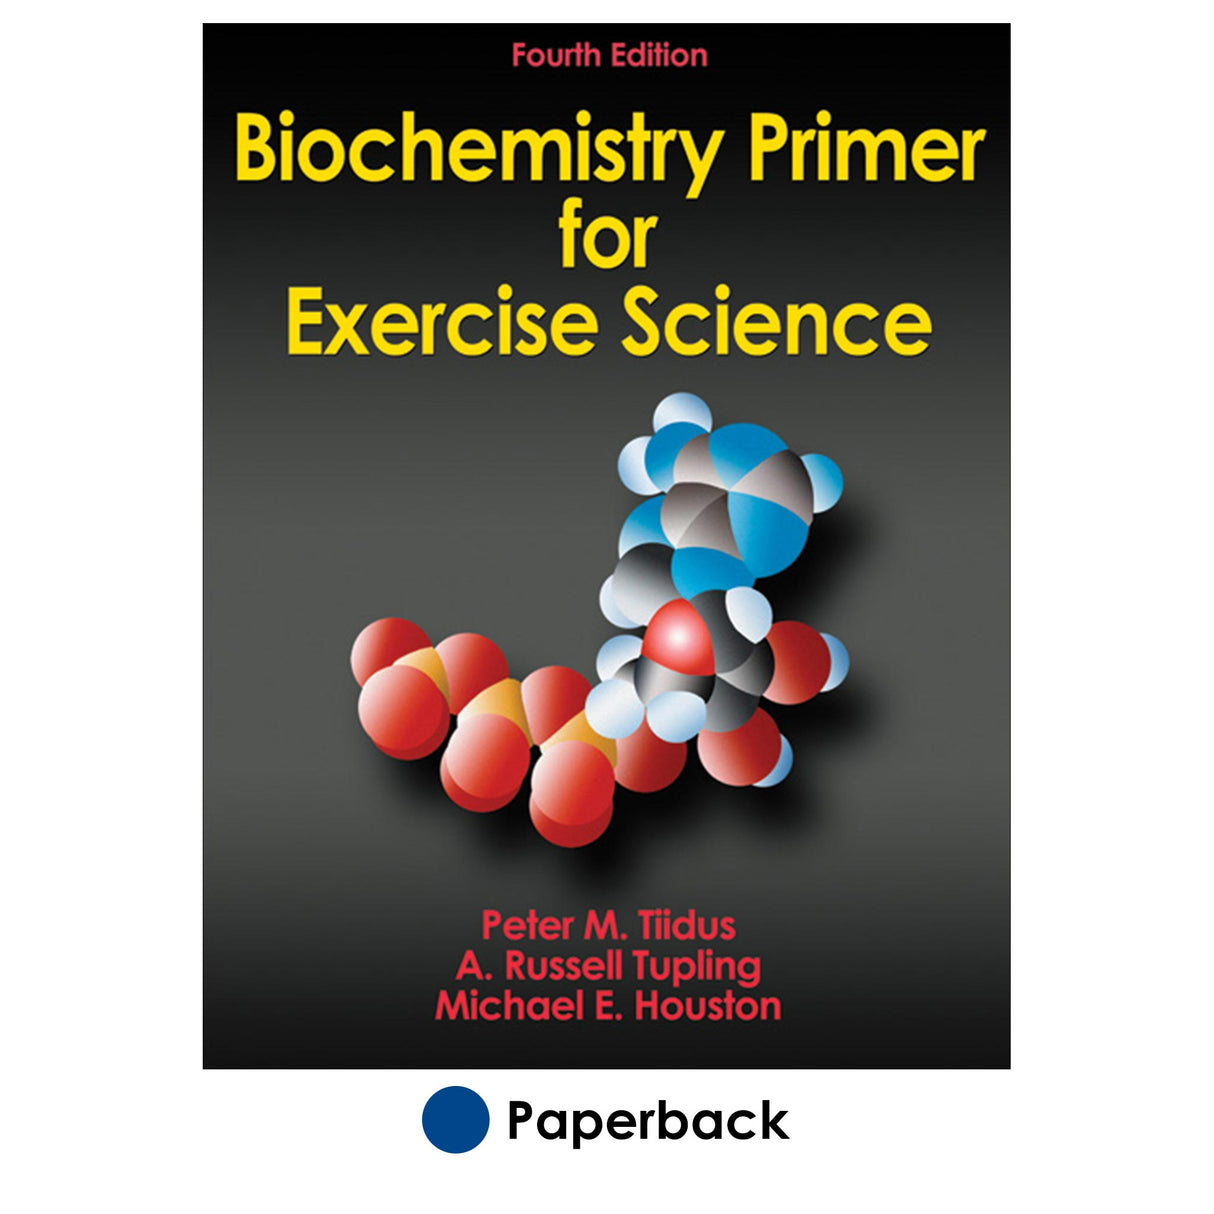 Biochemistry Primer for Exercise Science-4th Edition